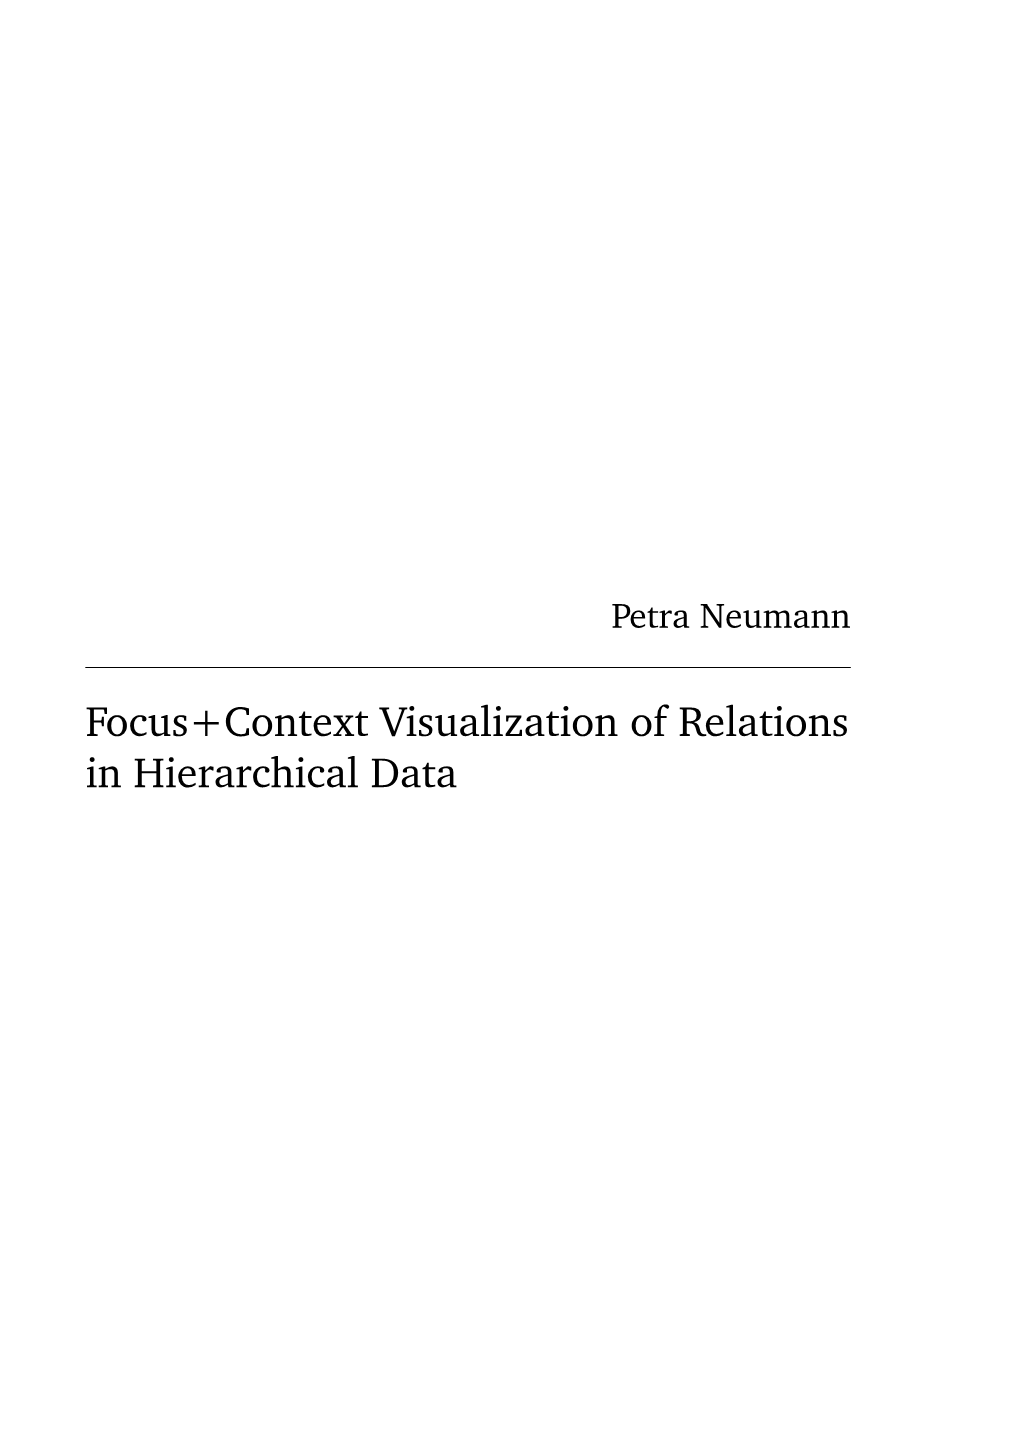 Focus+Context Visualization of Relations in Hierarchical Data